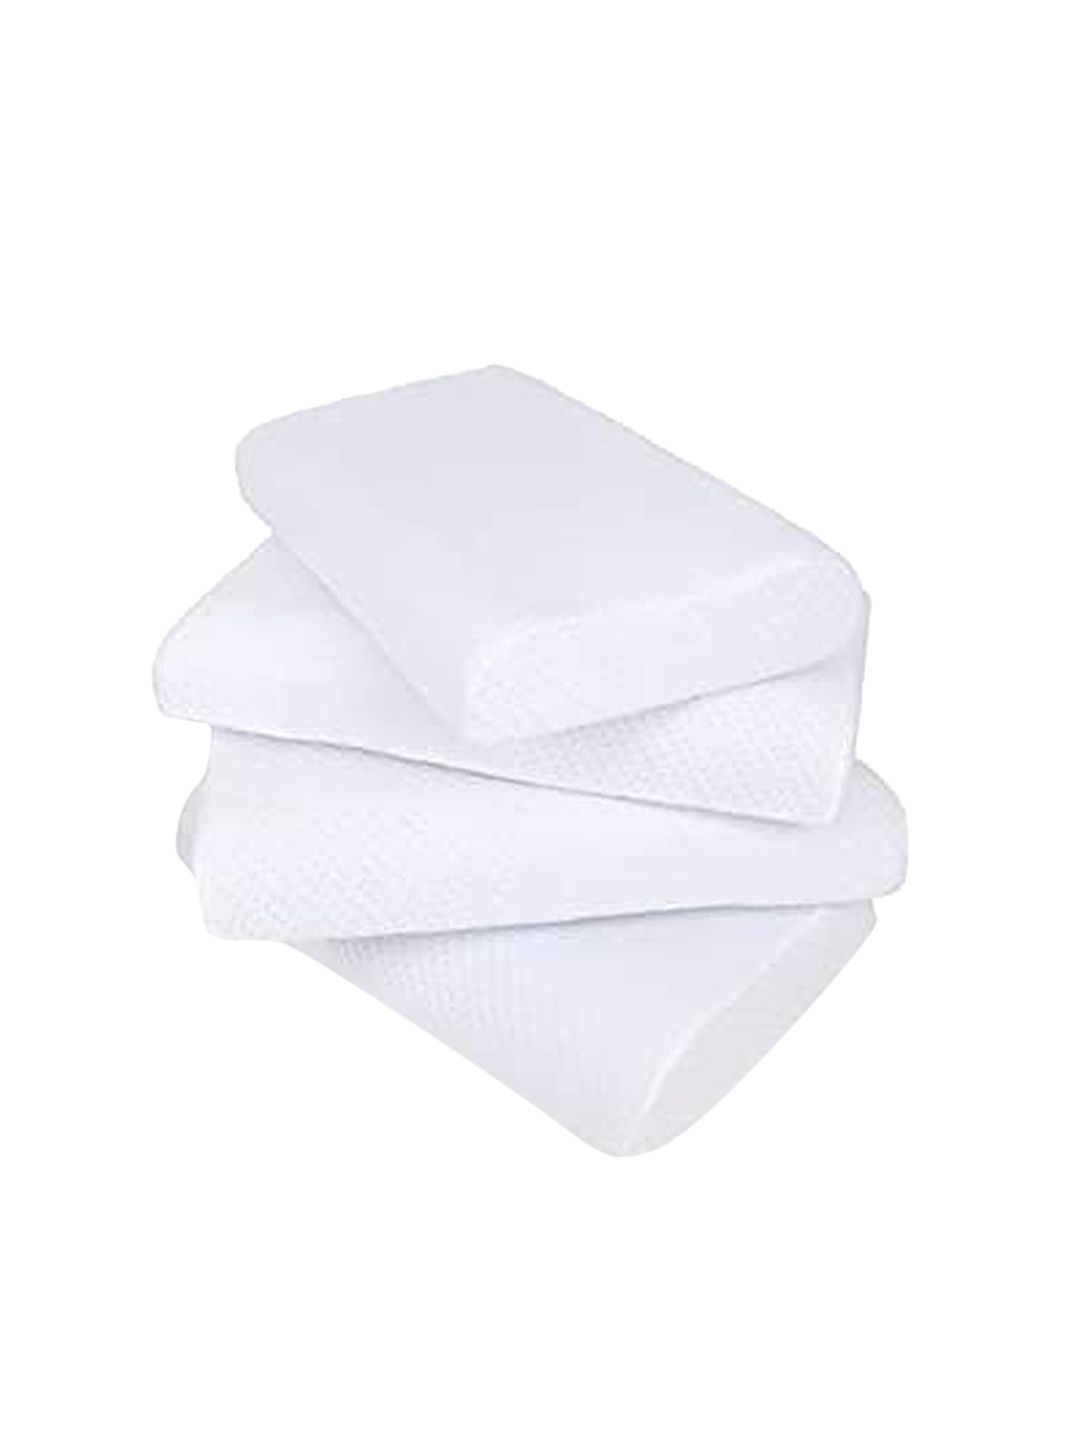 Sleepsia Set Of 4 White Solid Breeze Cool-Gel Infused Memory Foam Pillows Price in India